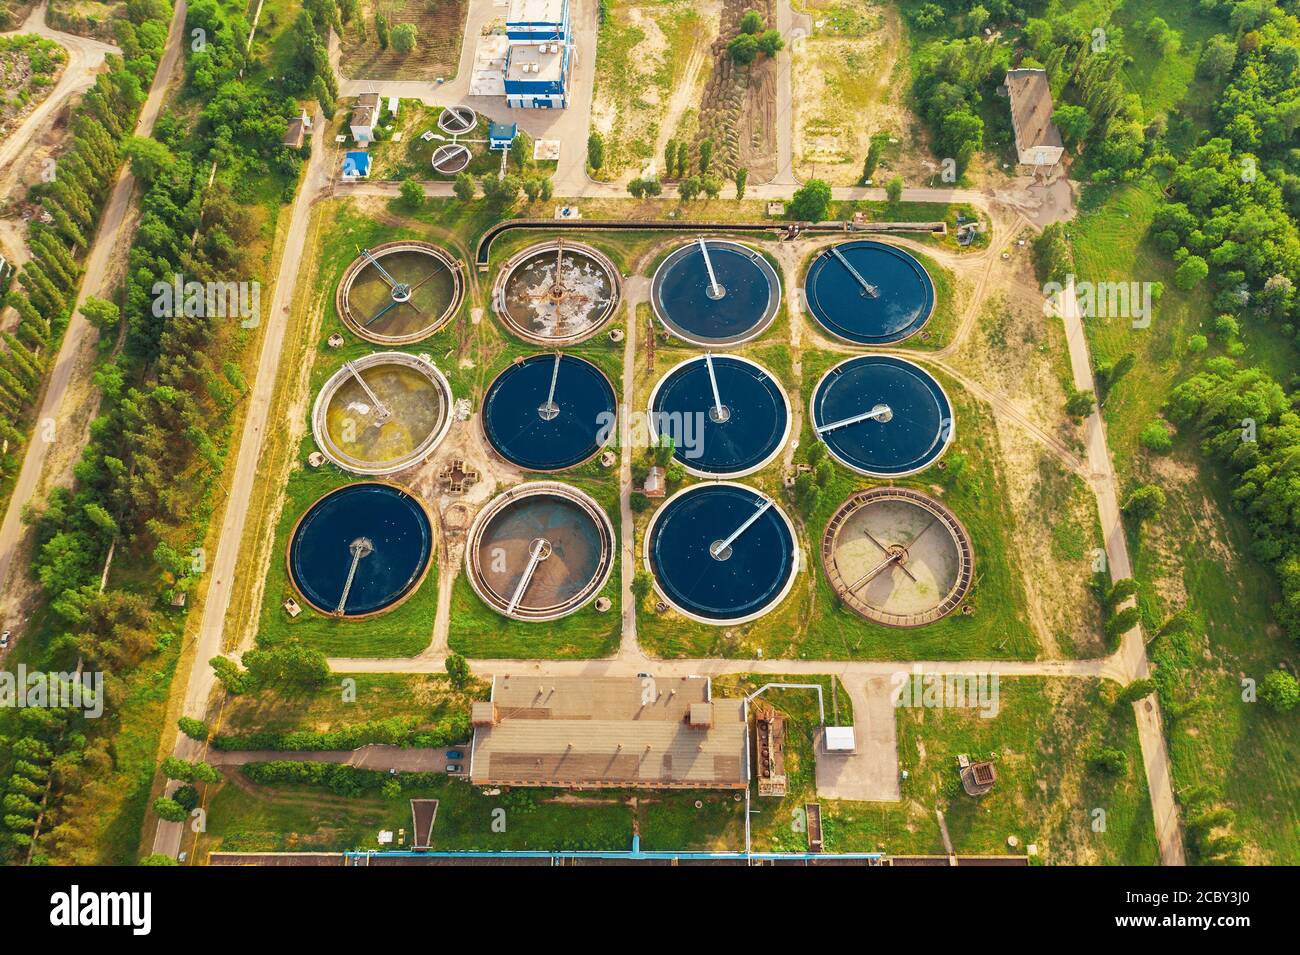 Wastewater treatment plant, filtration of dirty or sewage water, aerial top view. Stock Photo